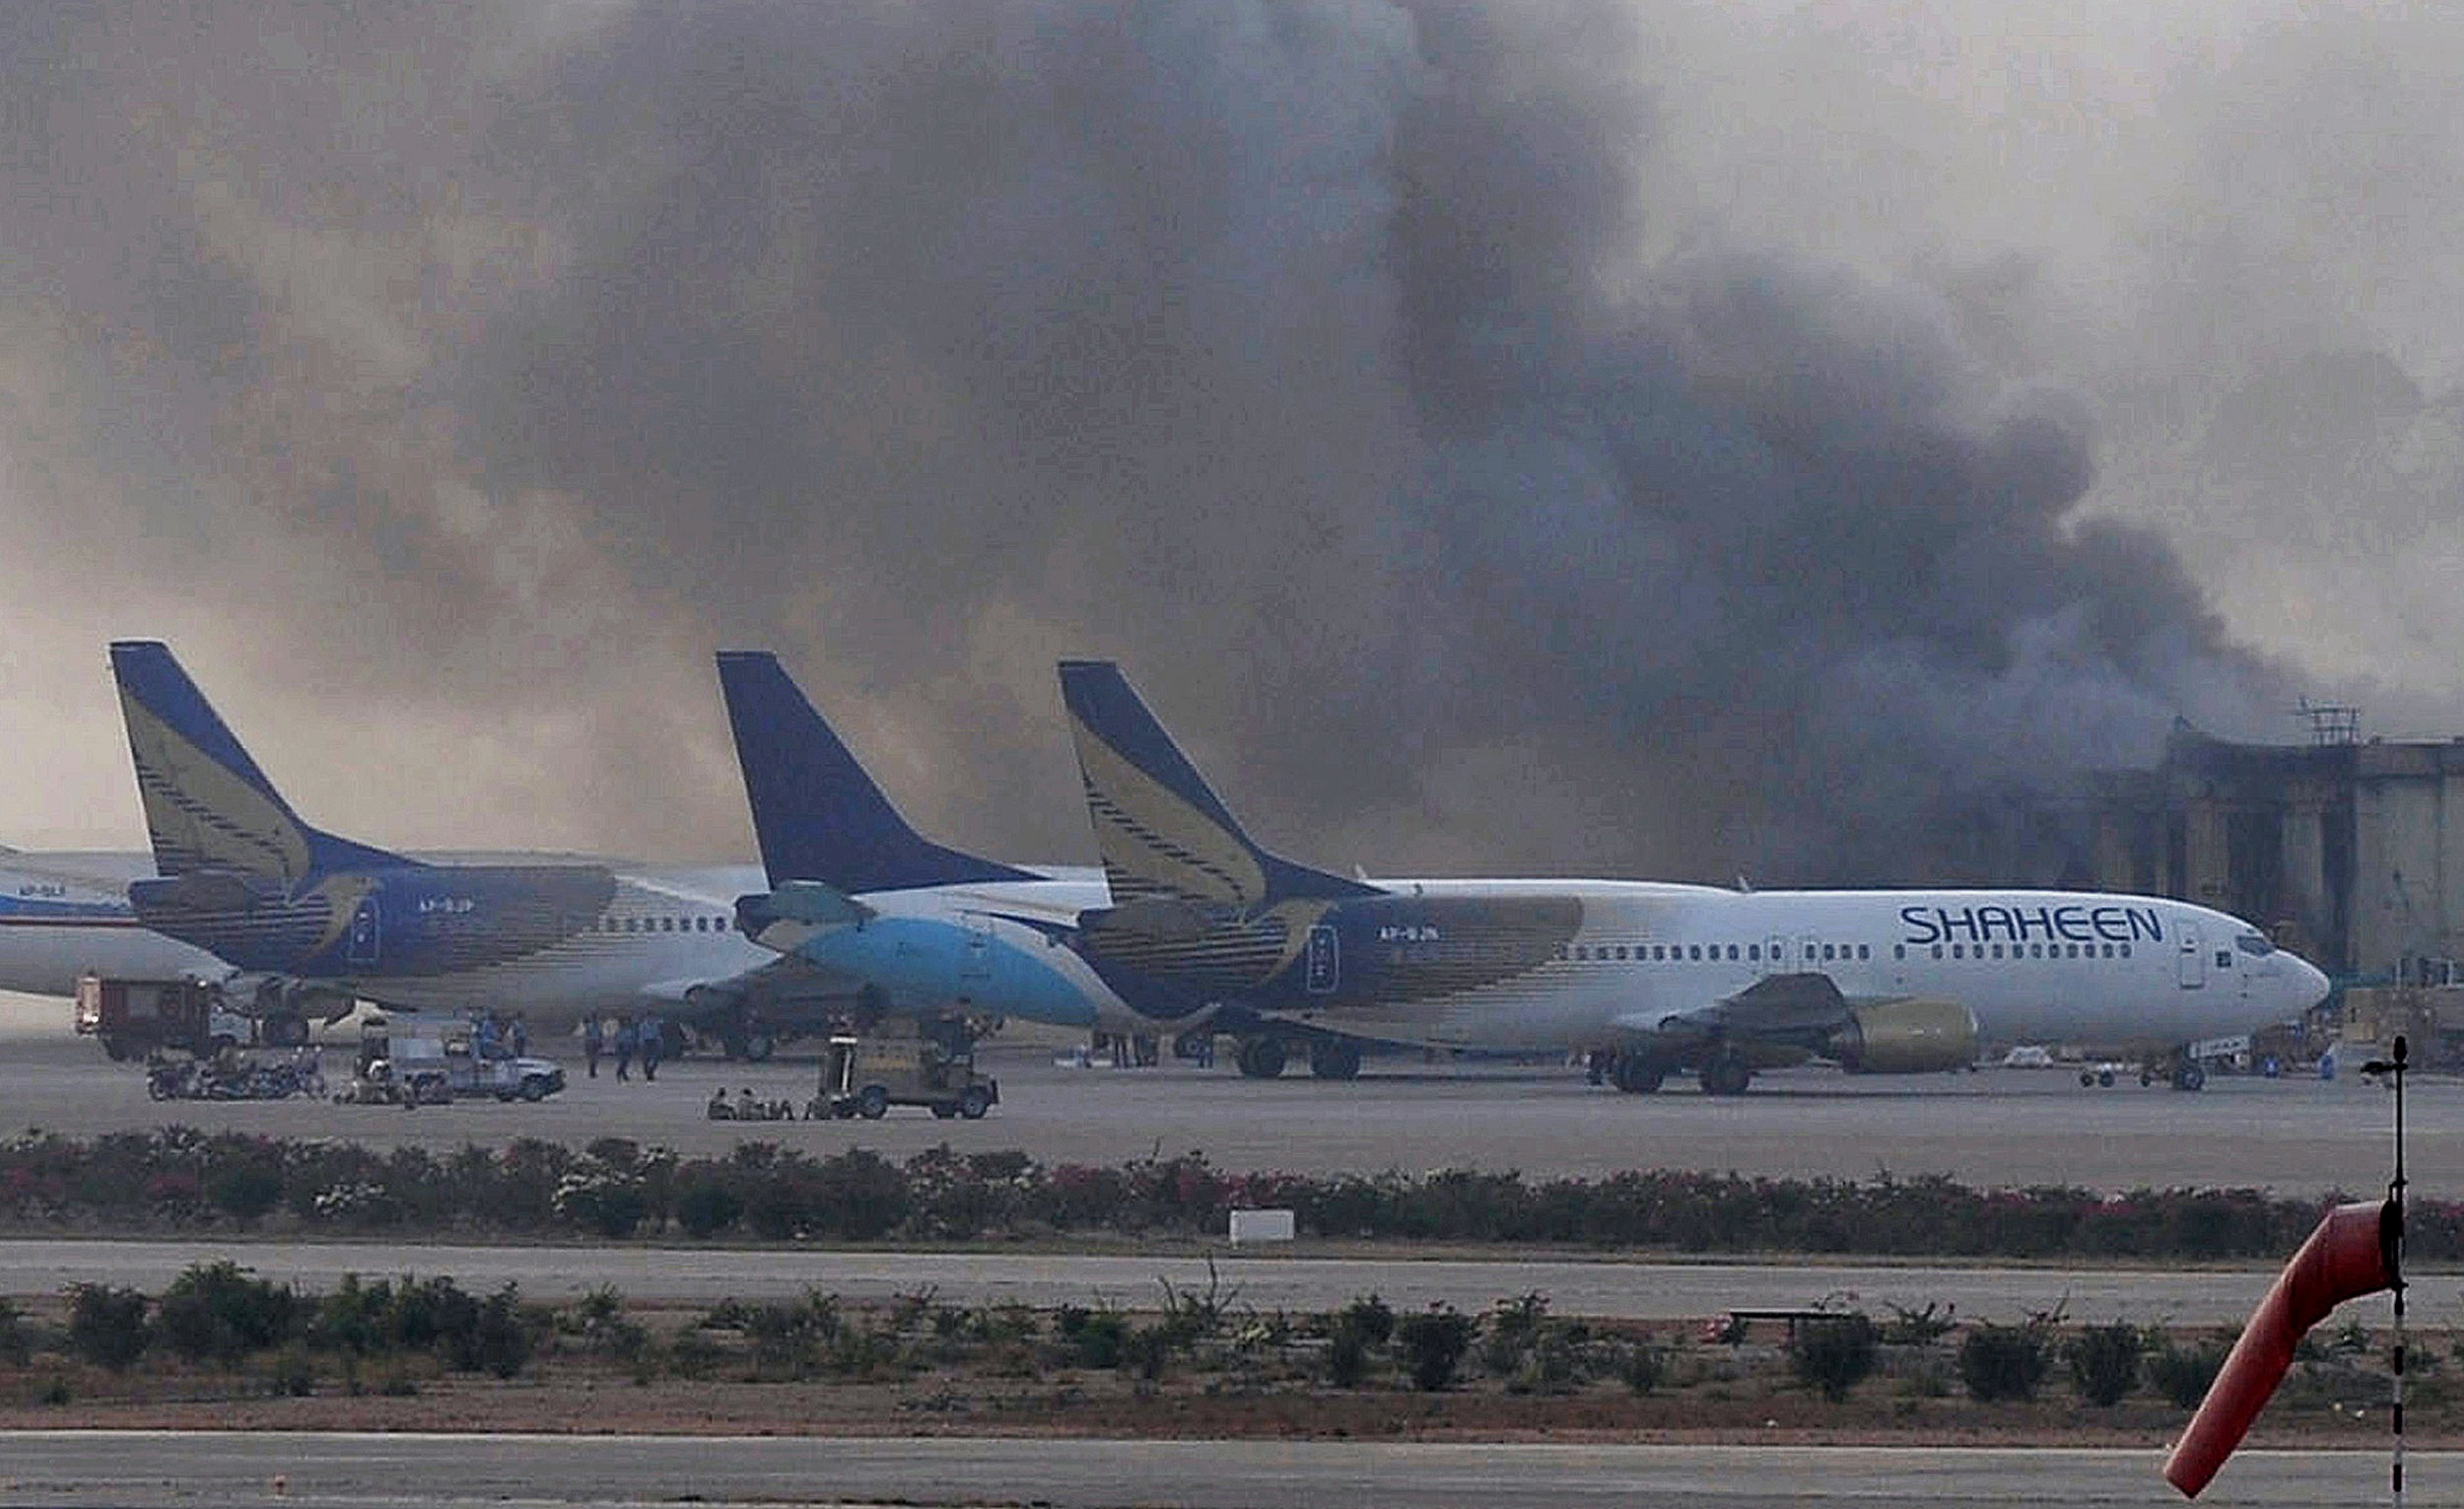 Smoke rises after militants launched an early morning assault at Jinnah International Airport in Karachi, Pakistan on June 9, 2014. (Rizwan Tabassum—AFP/Getty Images)